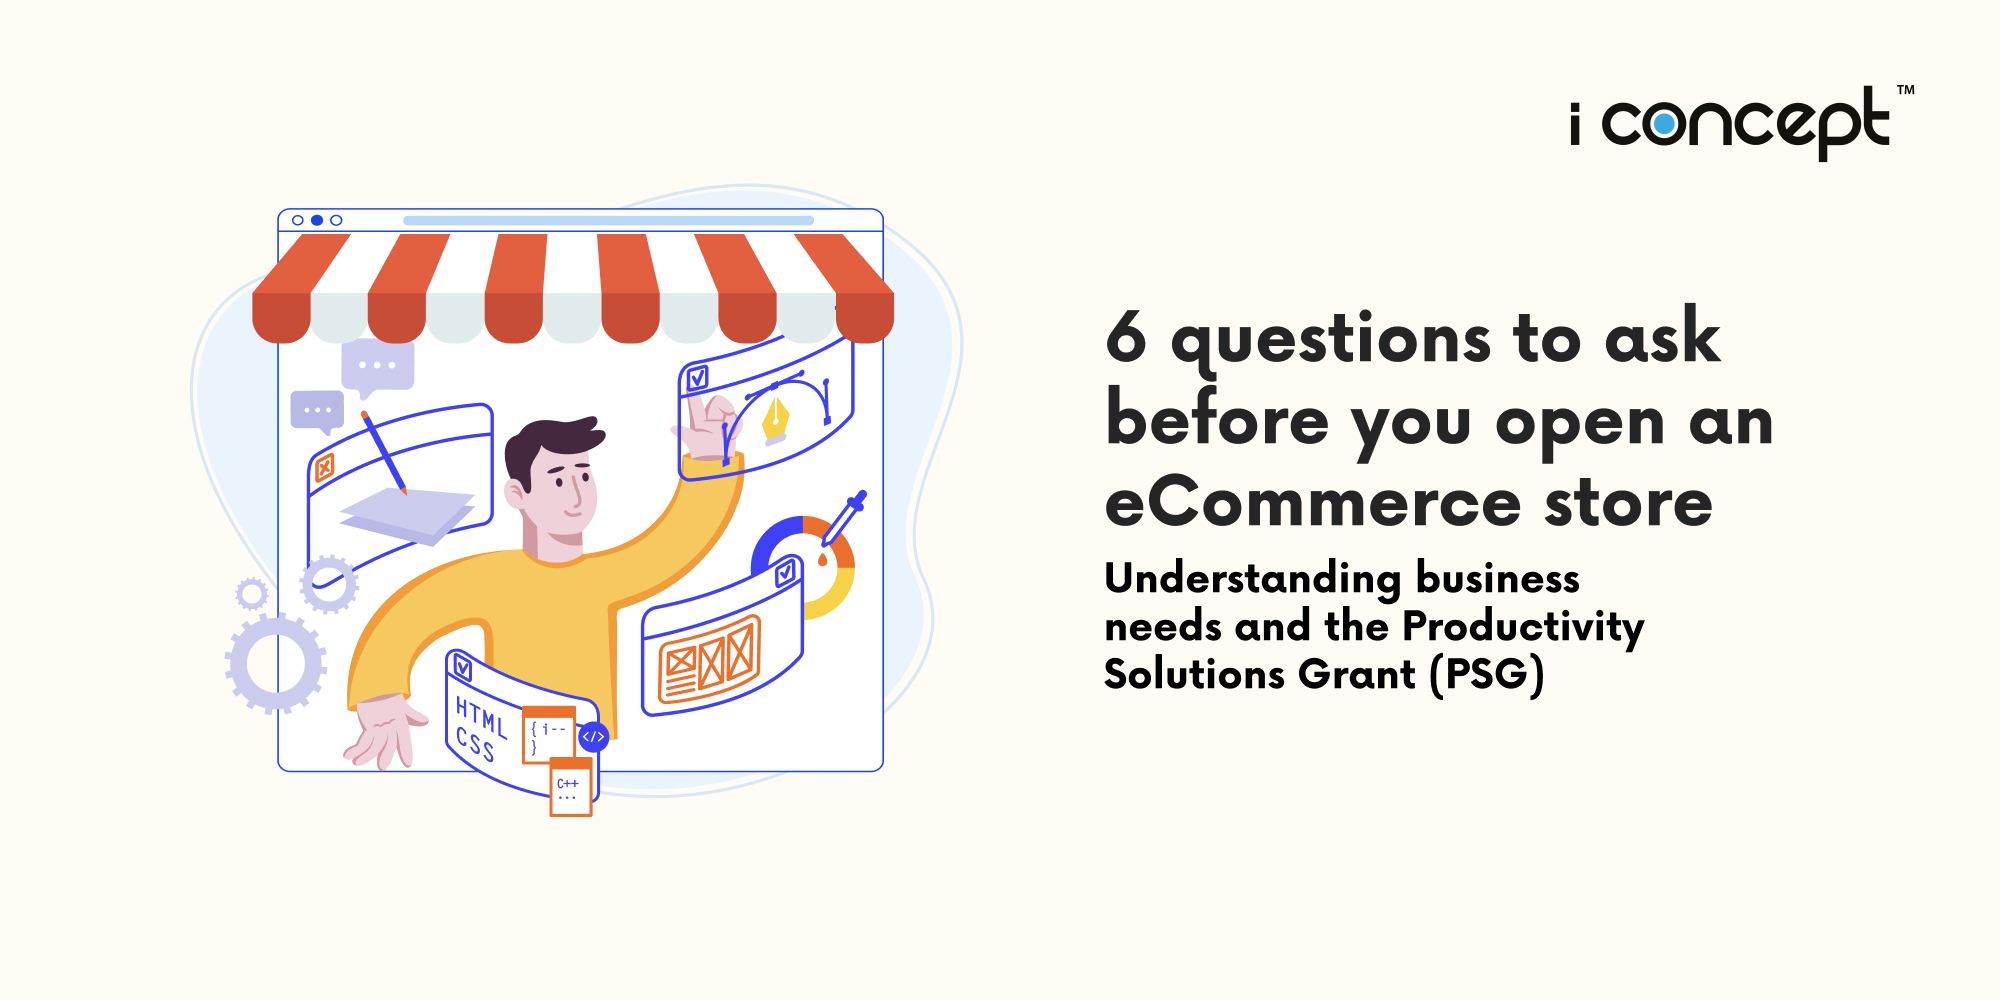 6-questions-to-ask-before-open-ecommerce-store-business-needs-productivity-solutions-grant-psg